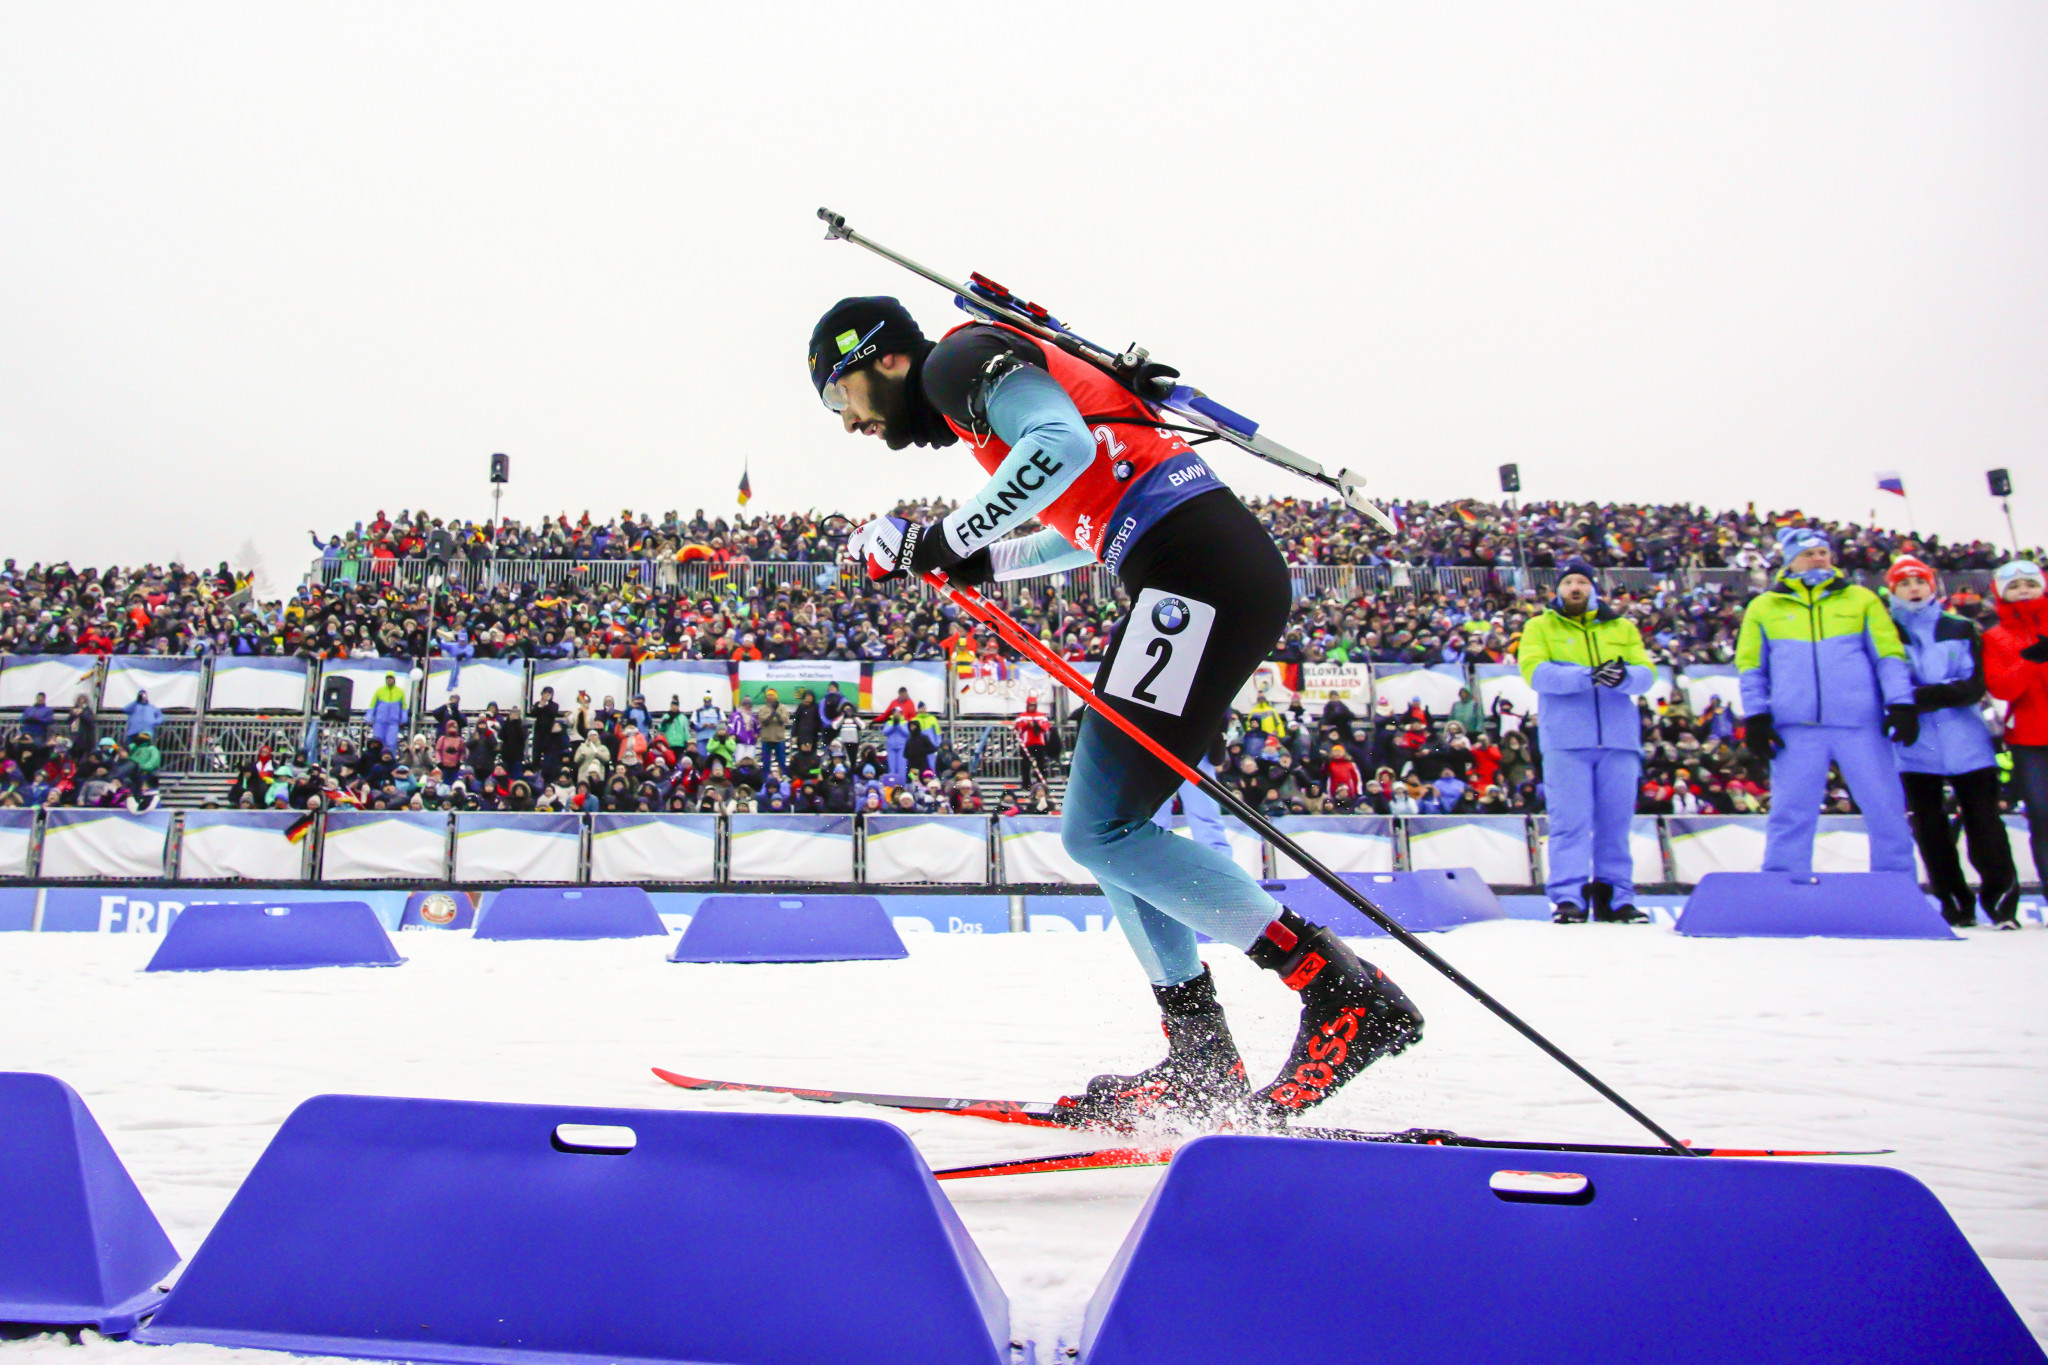 Fourcade looks to extend IBU World Cup advantage with Bø still on paternity leave